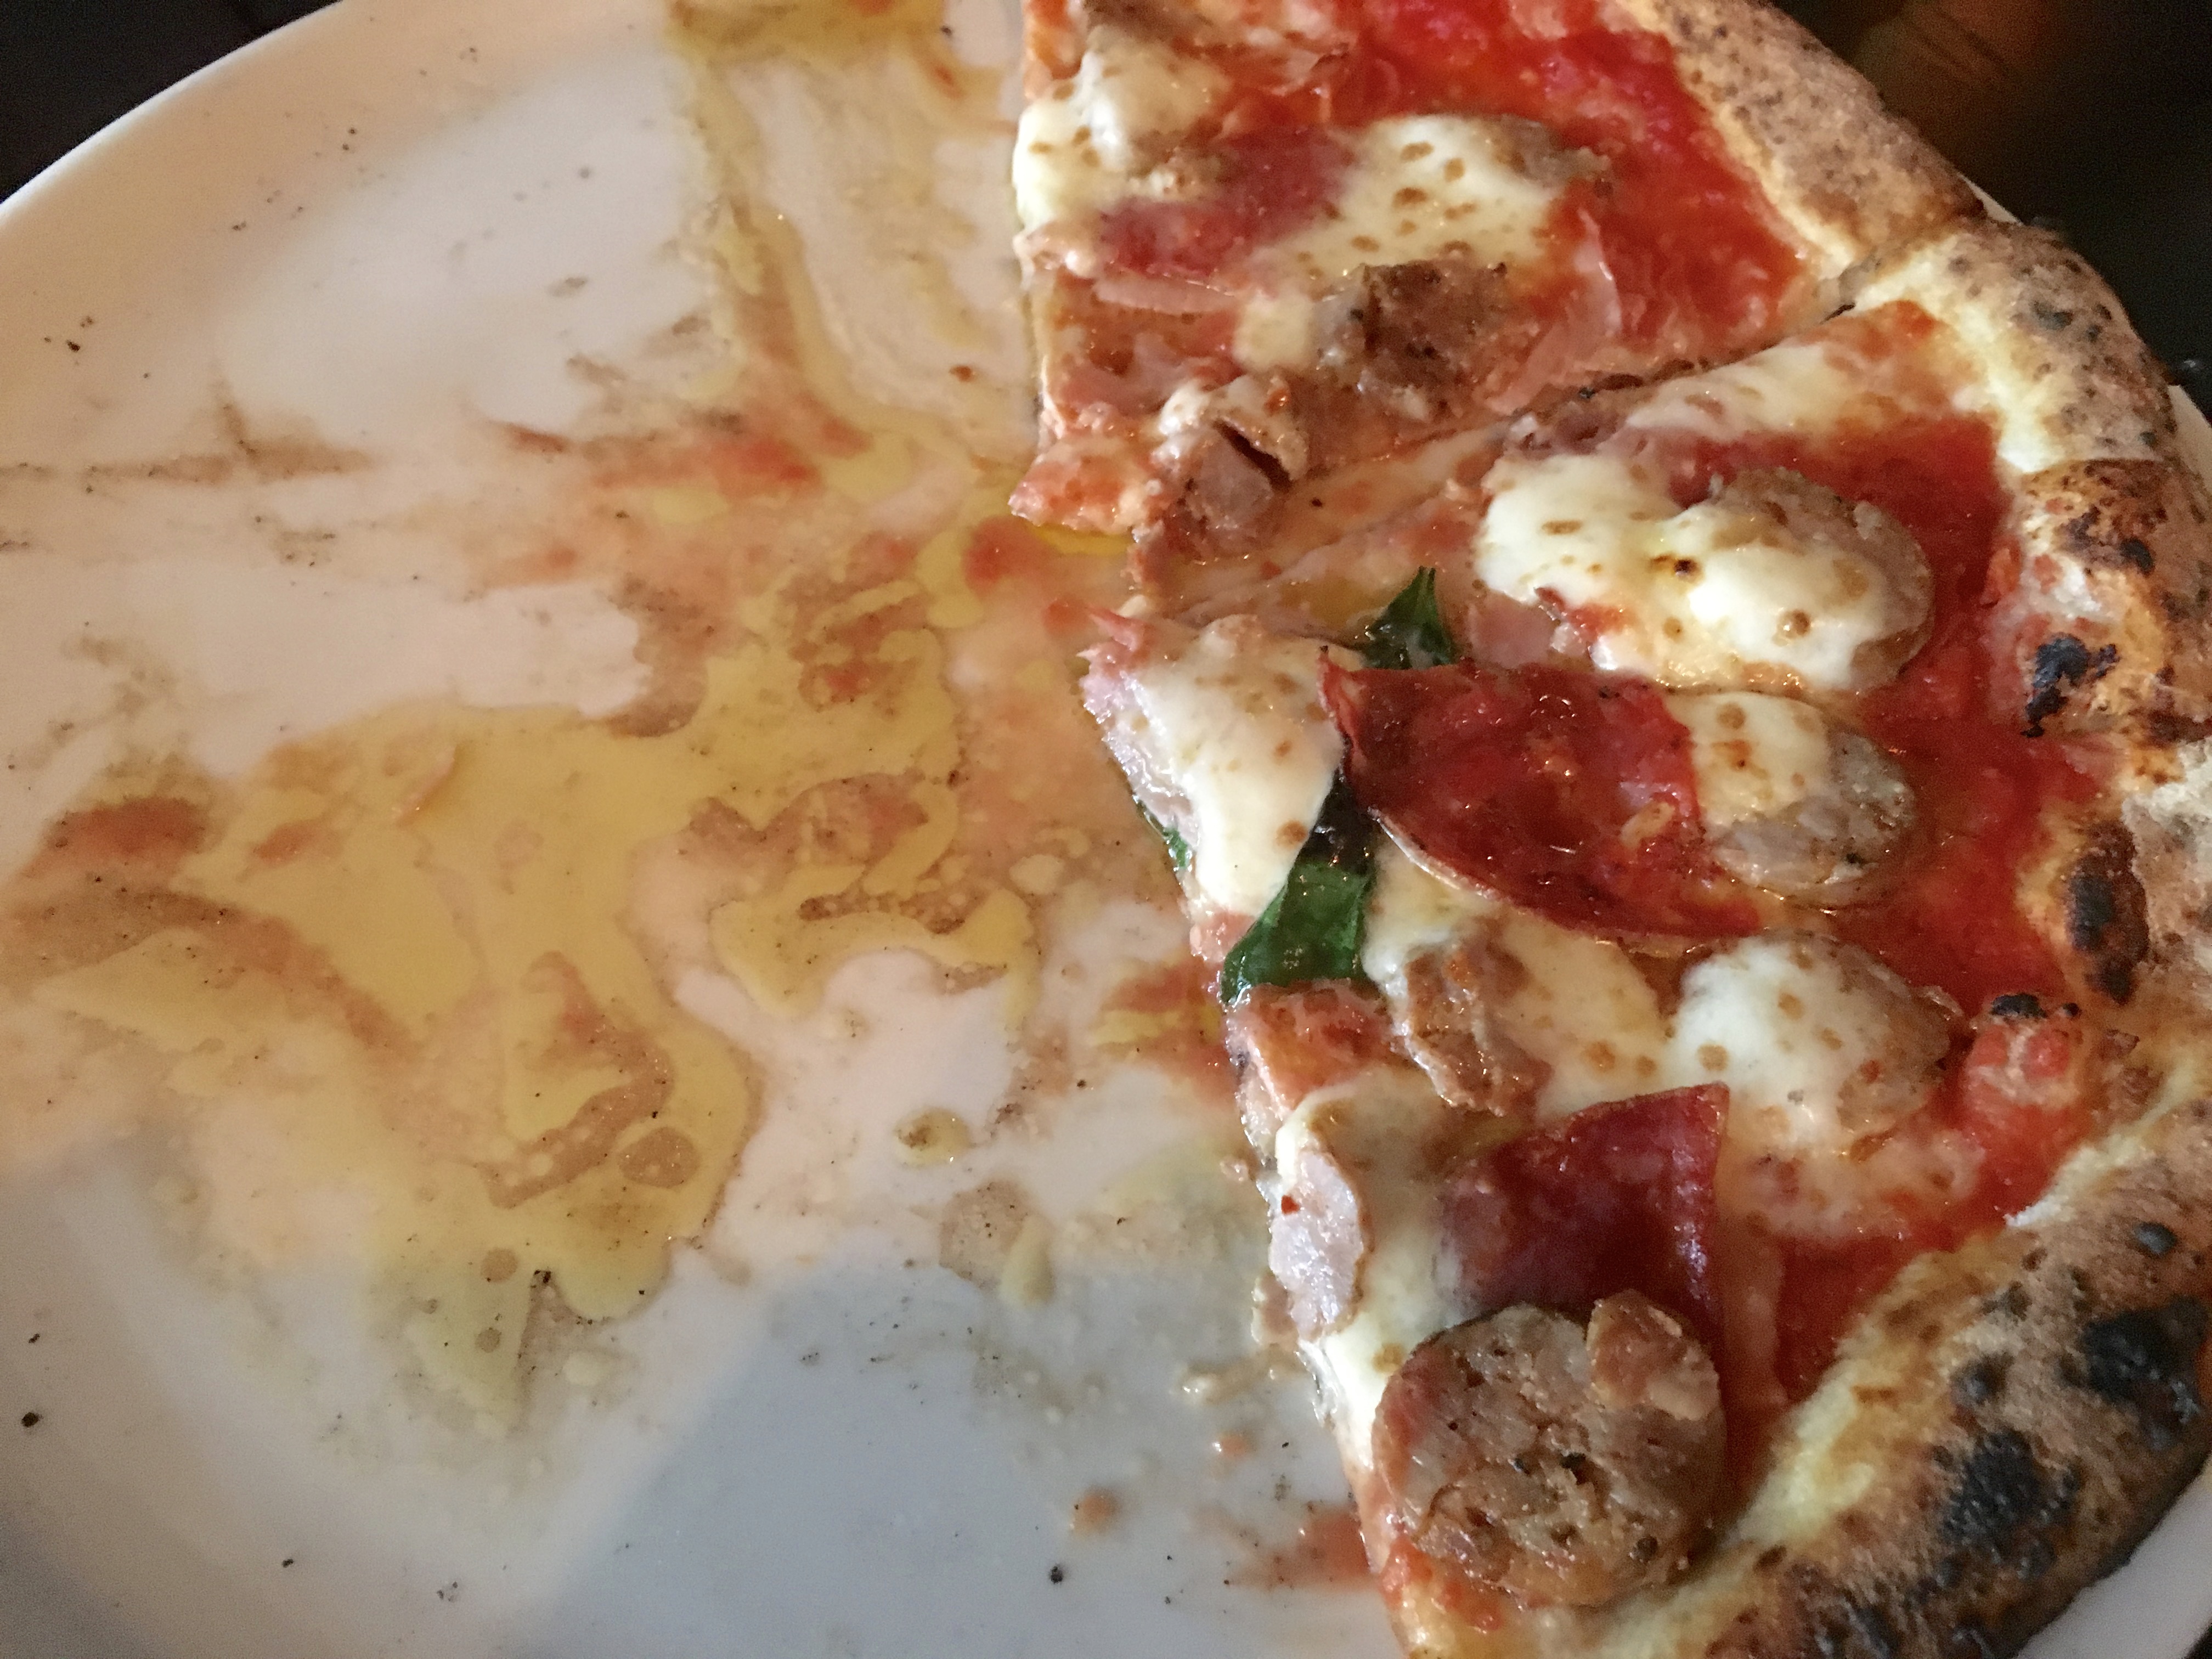 The Oils and Wetness of the Pizza at Bavaro's